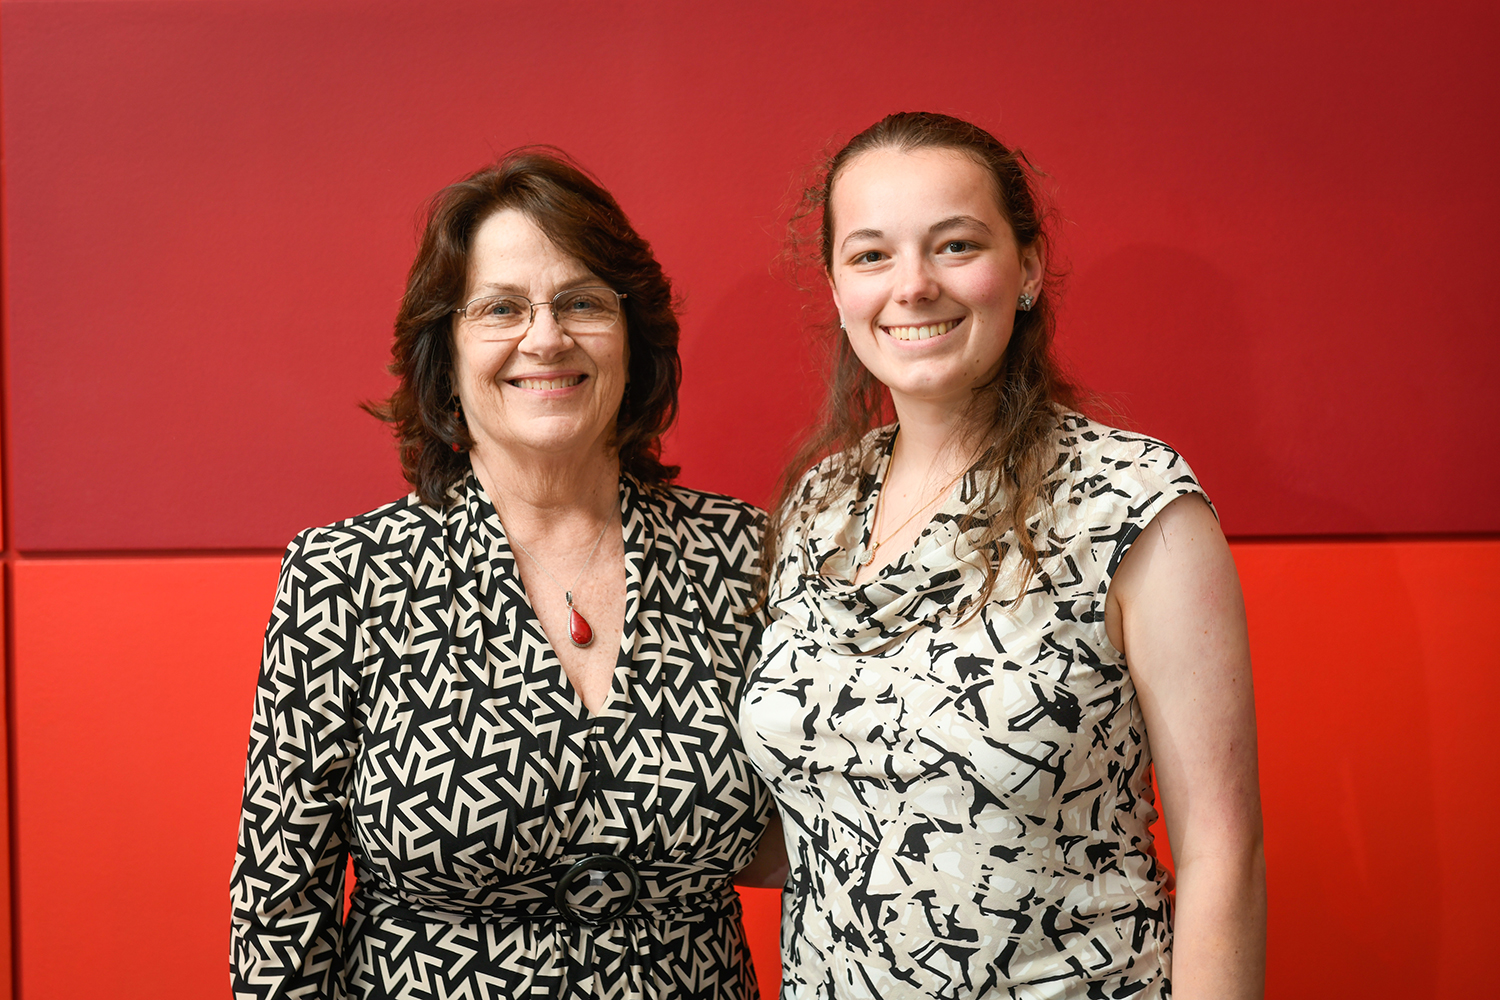 Suzanne Gordon, president of the NC State Engineering Board of Directors, meets with a scholarship recipient at the 2019 Engineering Annual Endowment Dinner.